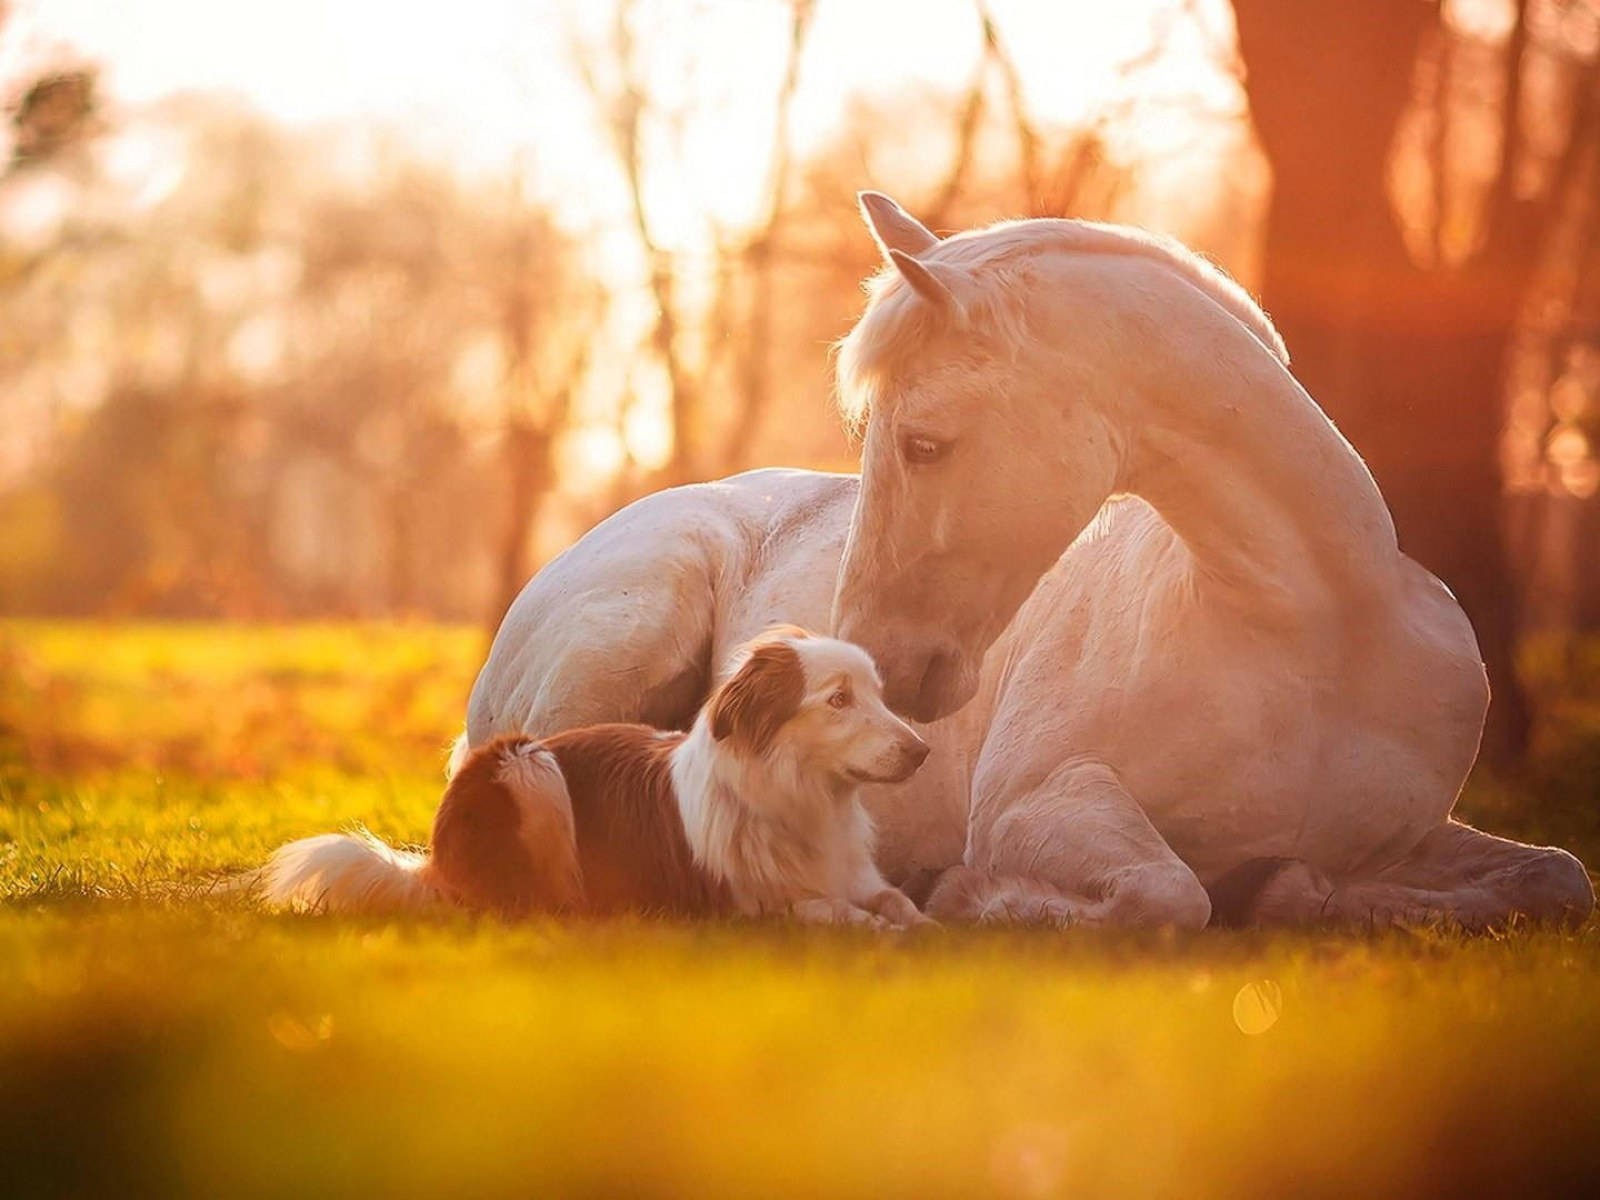 White Horse And Guard Dog Wallpaper